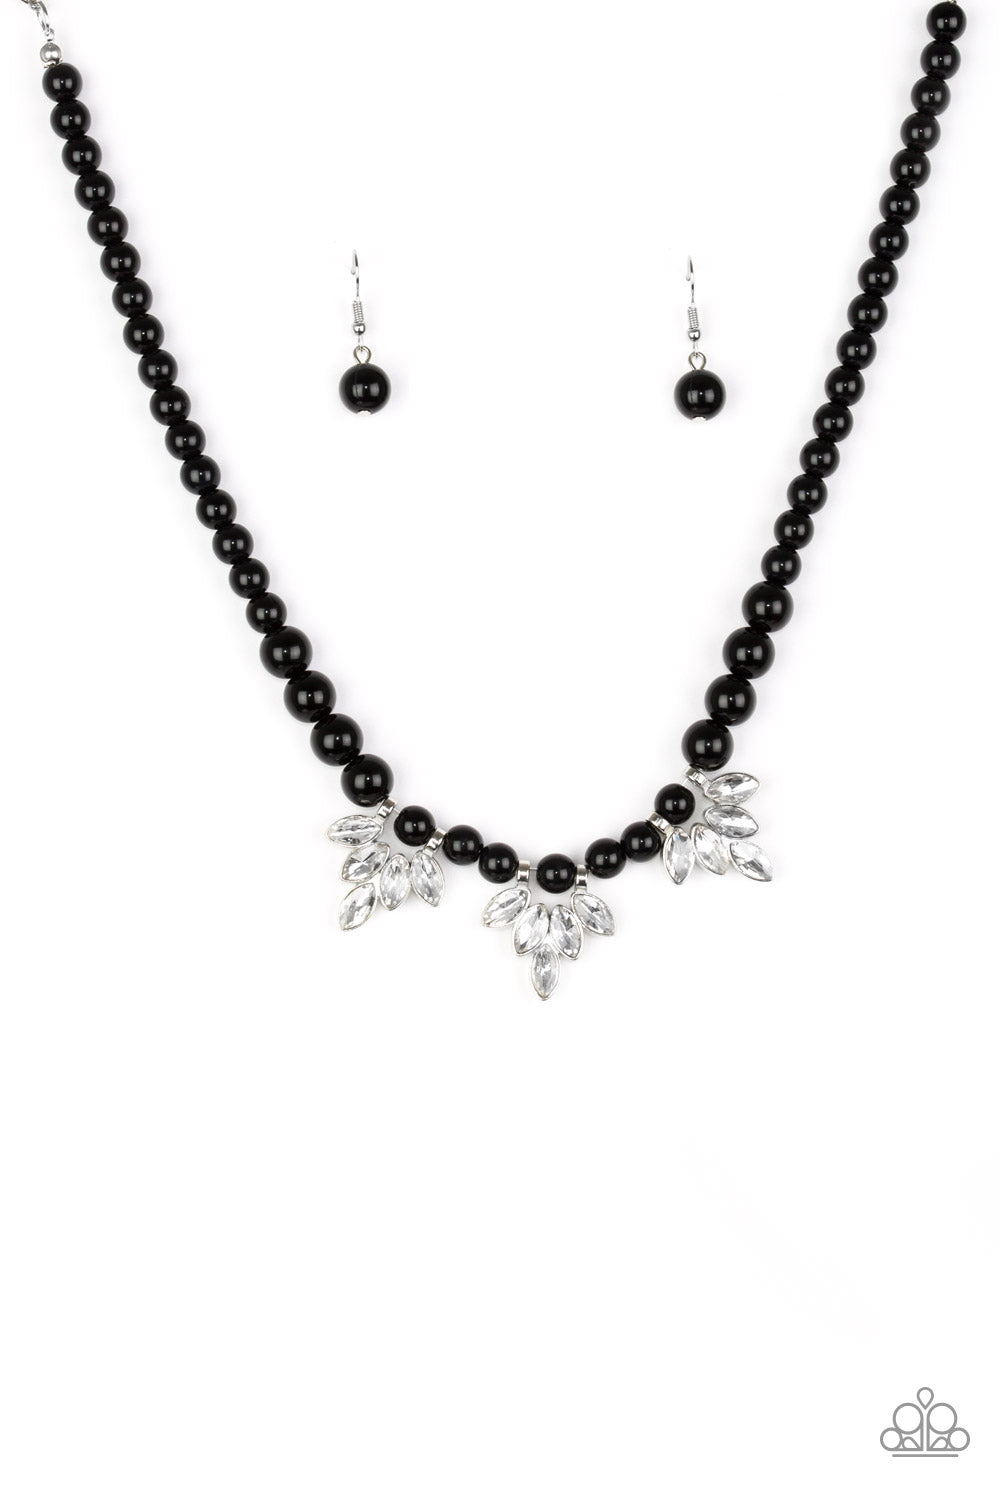 Society Socialite Black Necklace - Paparazzi Accessories Item #JJG-N7 A strand of shiny black beads drapes elegantly below the collar. Featuring regal marquise style cuts, glittery white rhinestone frames swing from the beaded strand for a timeless finish. Features an adjustable clasp closure.  Sold as one individual necklace. Includes one pair of matching earrings.